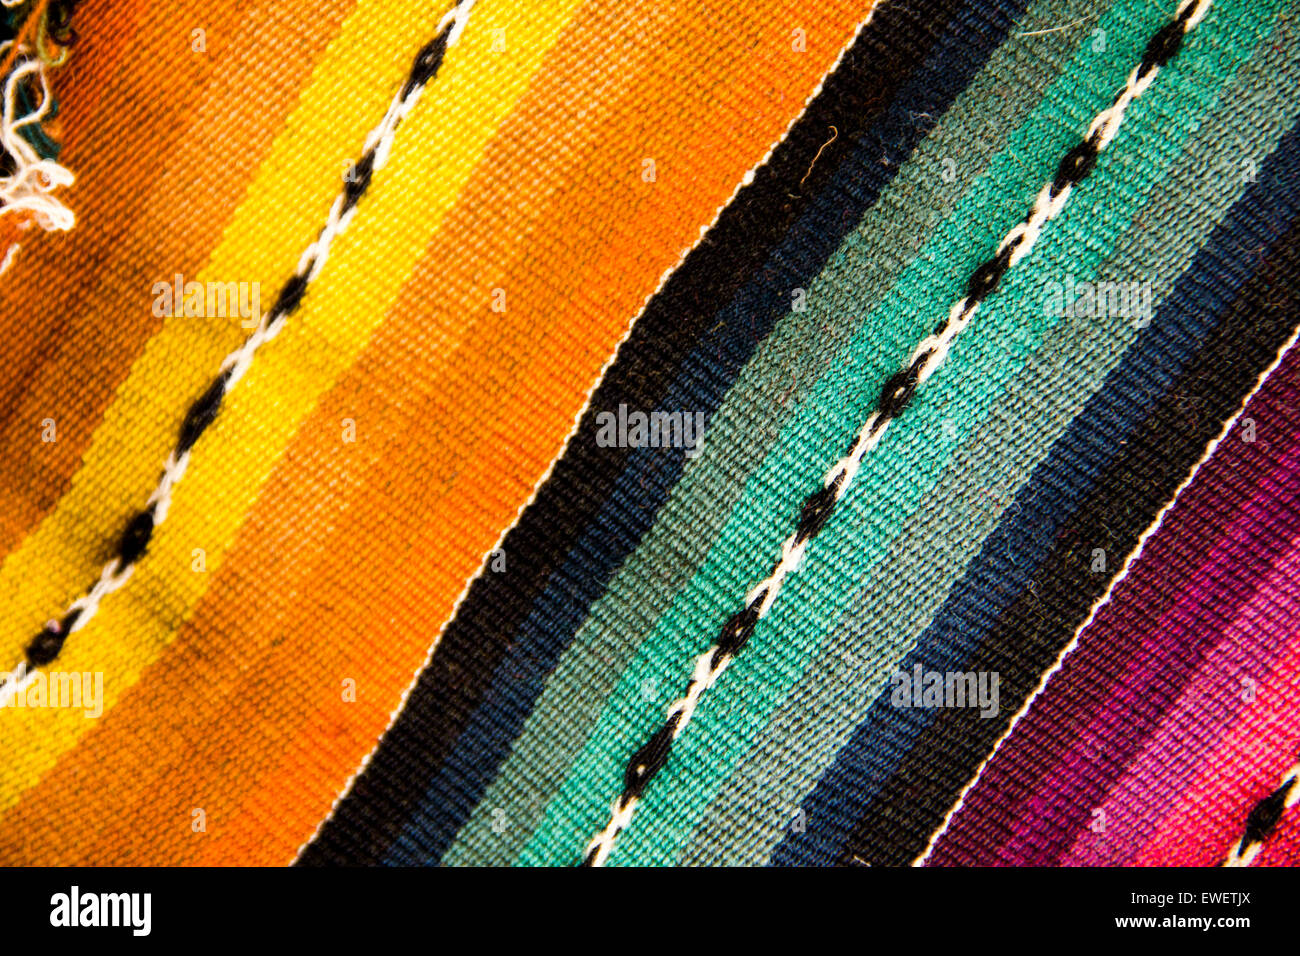 Beautiful patterns and textures in hand-woven fabrics at weaving demonstration on rural Peru. Stock Photo